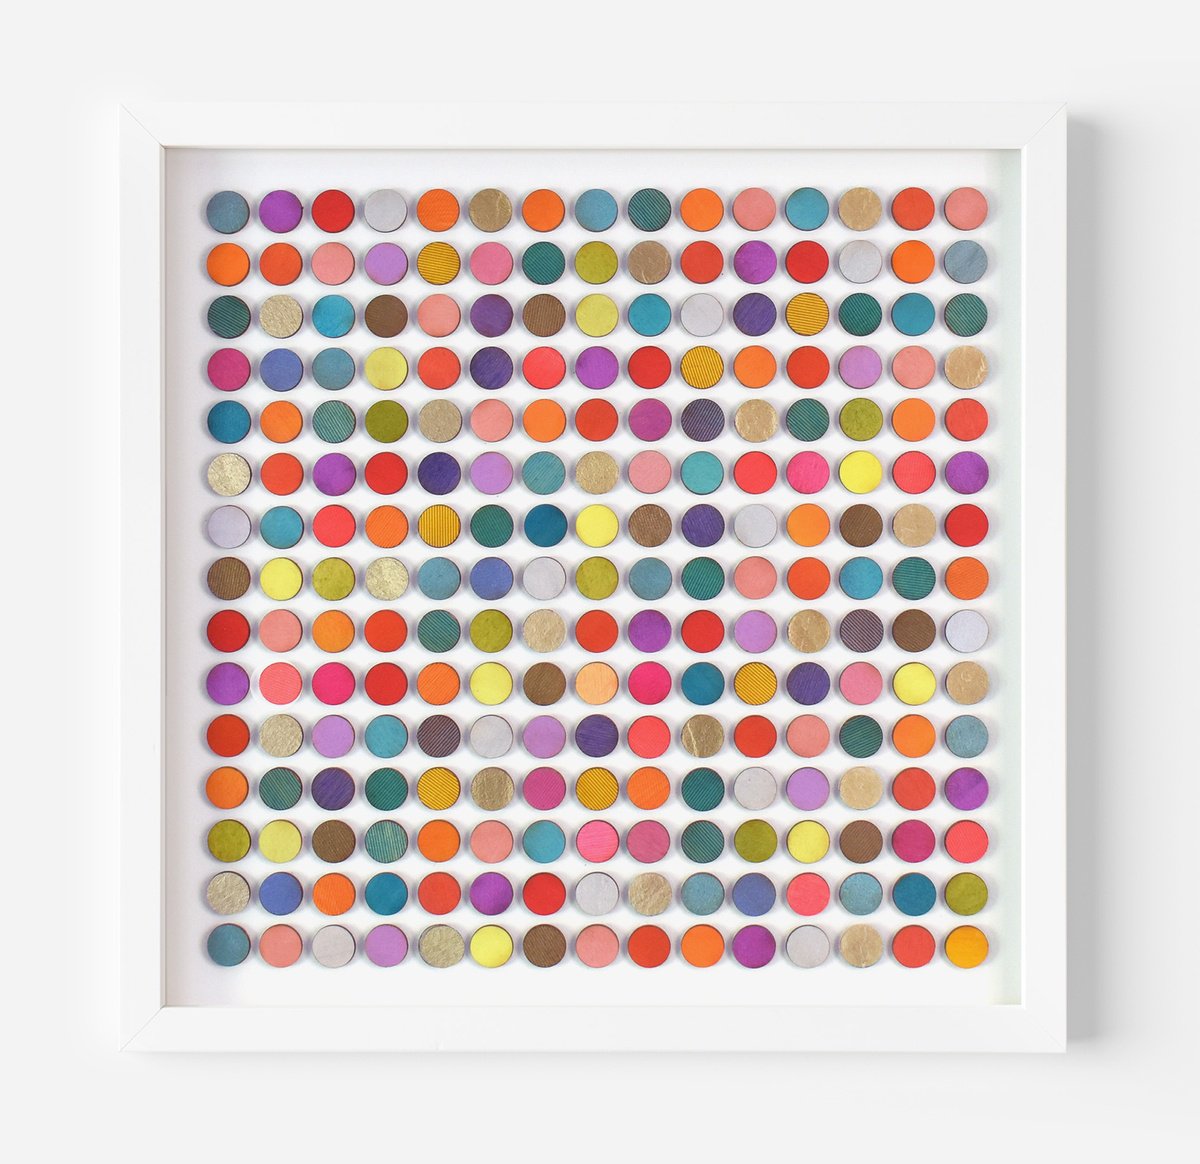 Two Hundred and Twenty Five 3D Painted Dots with Gold Original Painting by Amelia Coward